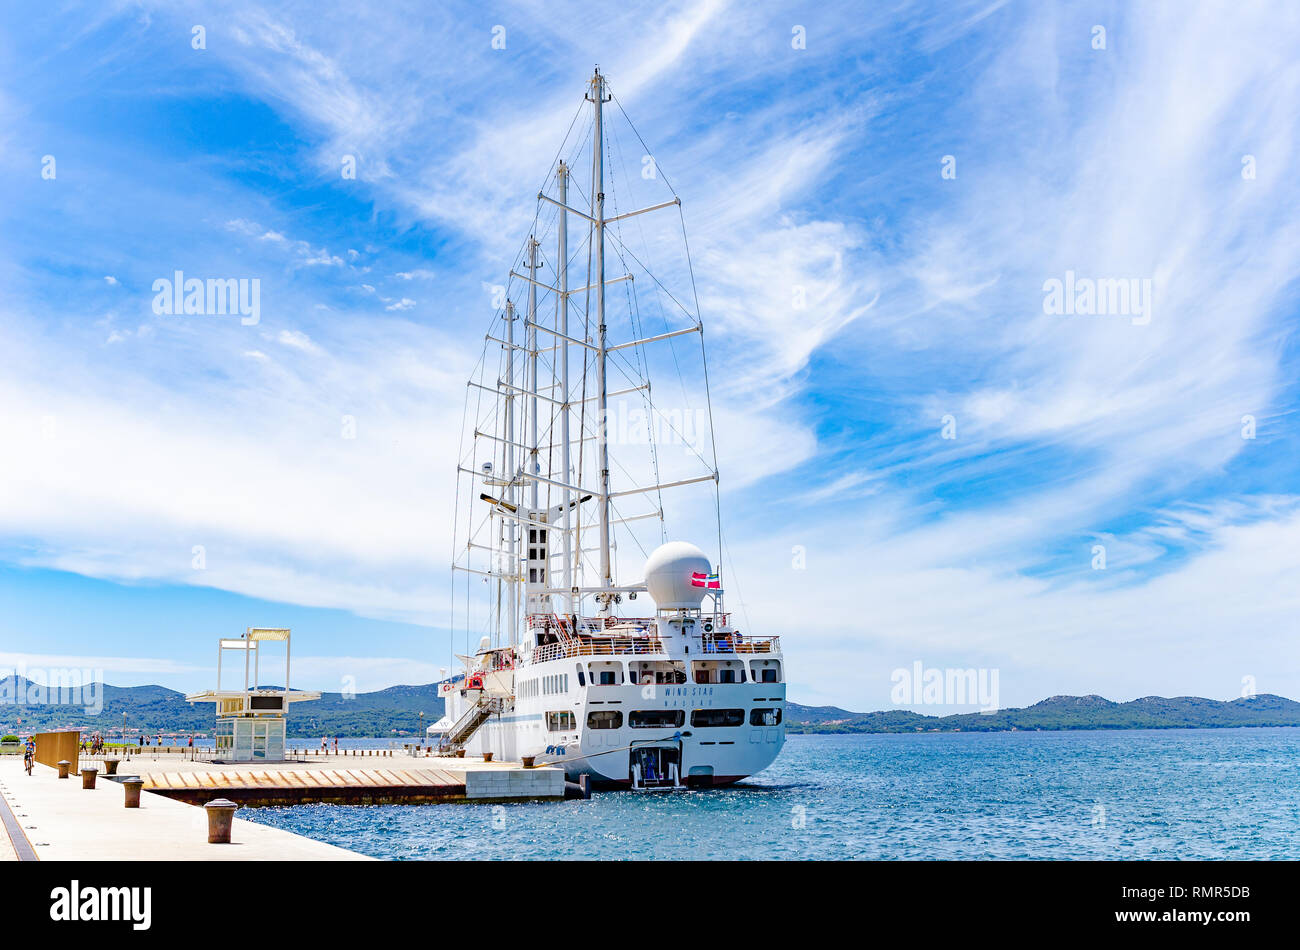 A large cruise sailing ship in the port on the embankment of the city of Zadar. Stock Photo